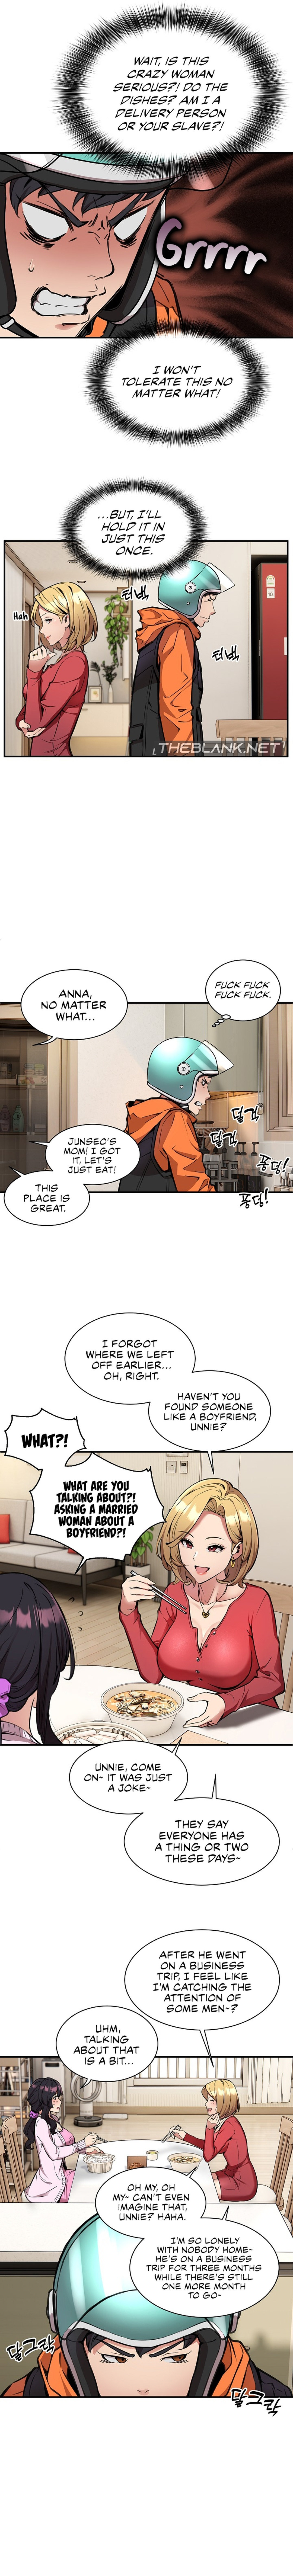 Driver in the New City - Chapter 1 Page 25